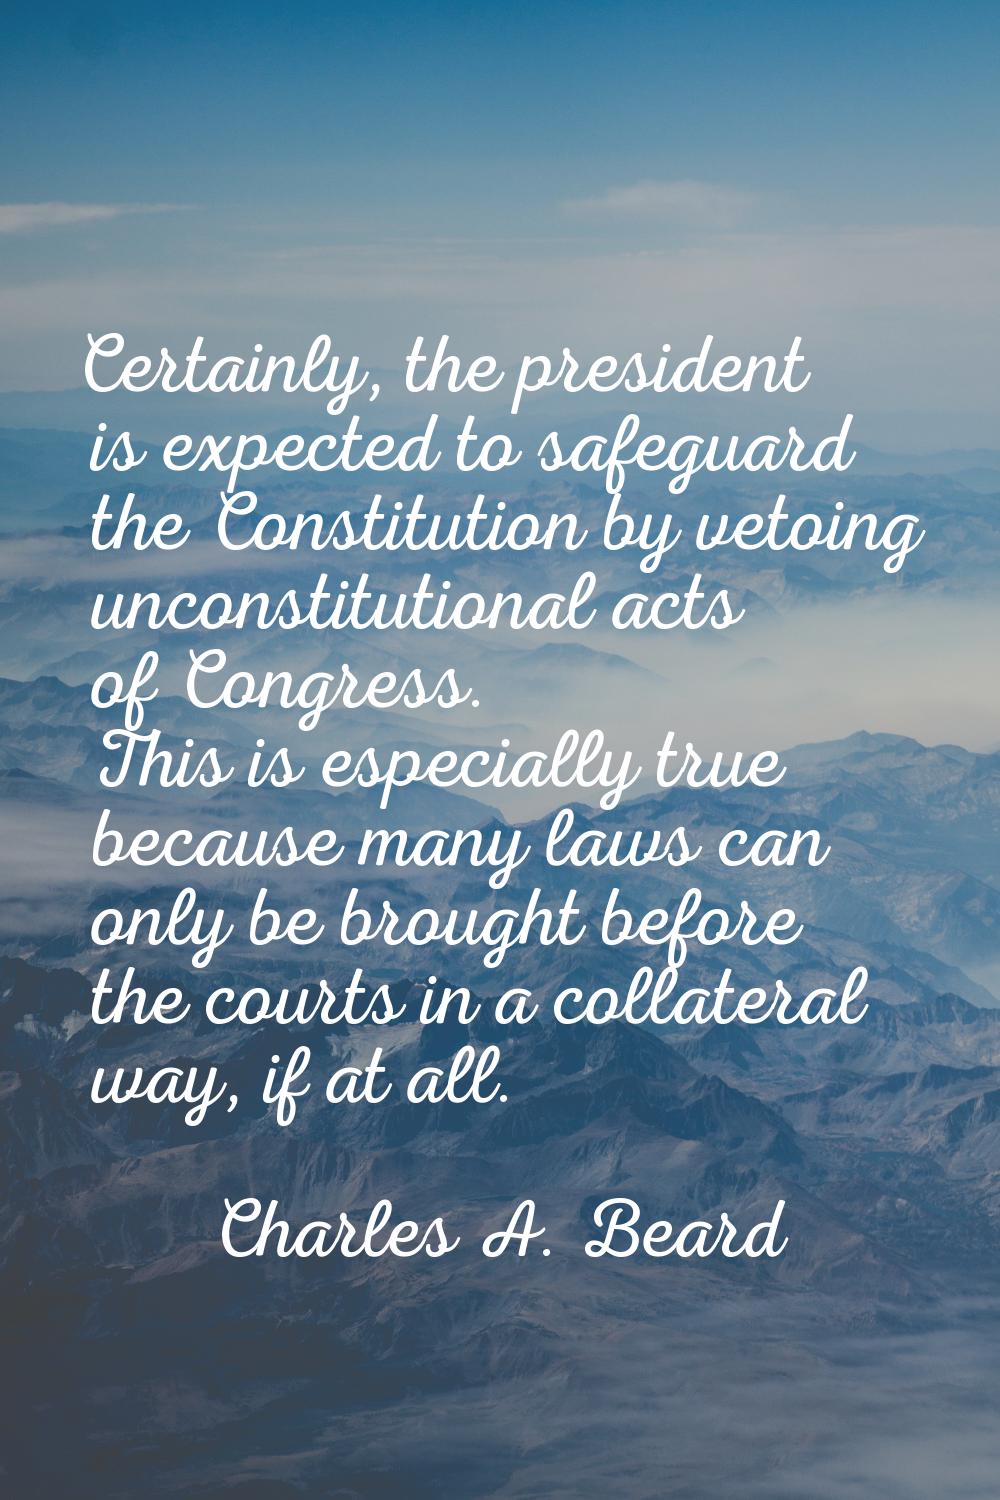 Certainly, the president is expected to safeguard the Constitution by vetoing unconstitutional acts